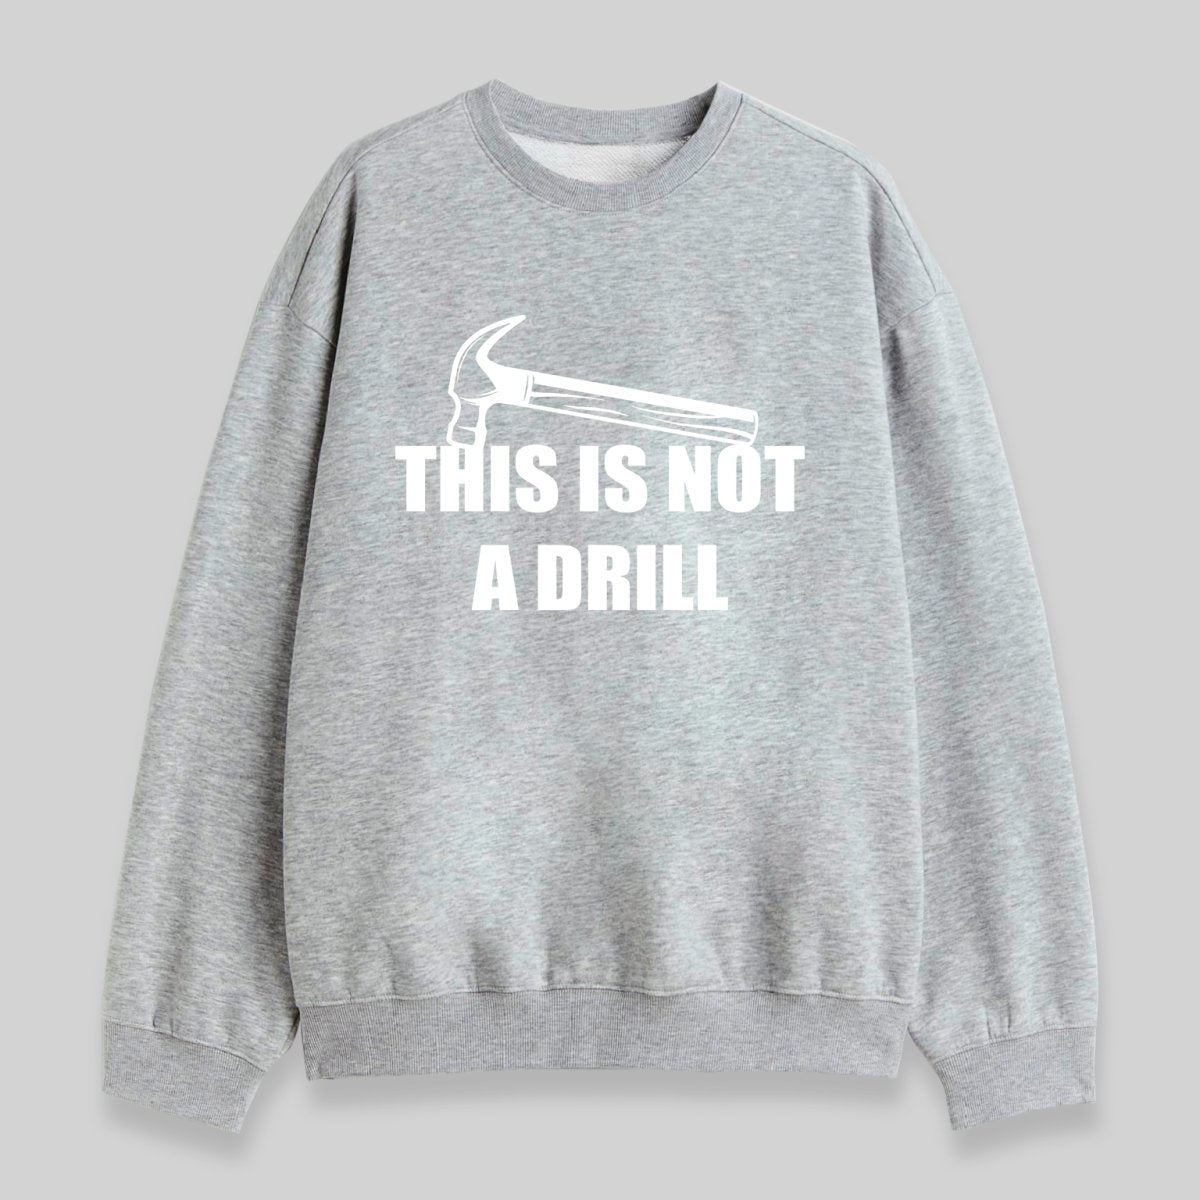 This Is Not A Drill Sweatshirt - Geeksoutfit